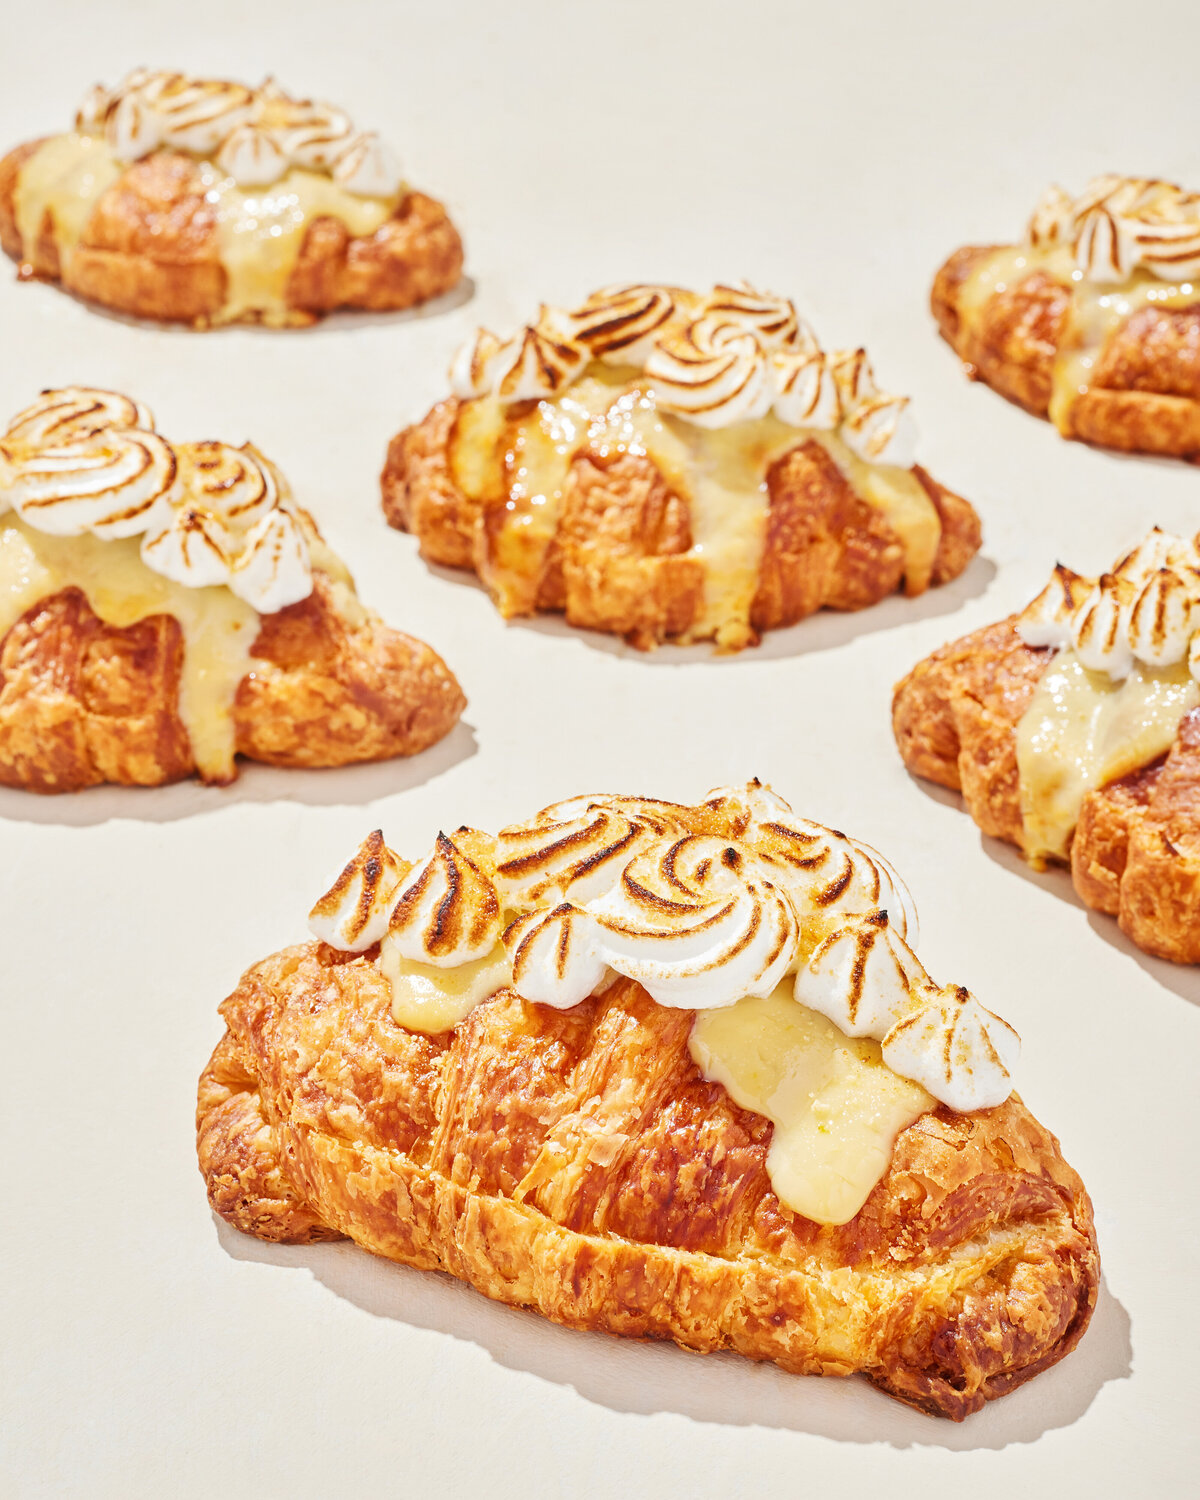 Croissants topped with whipped cream